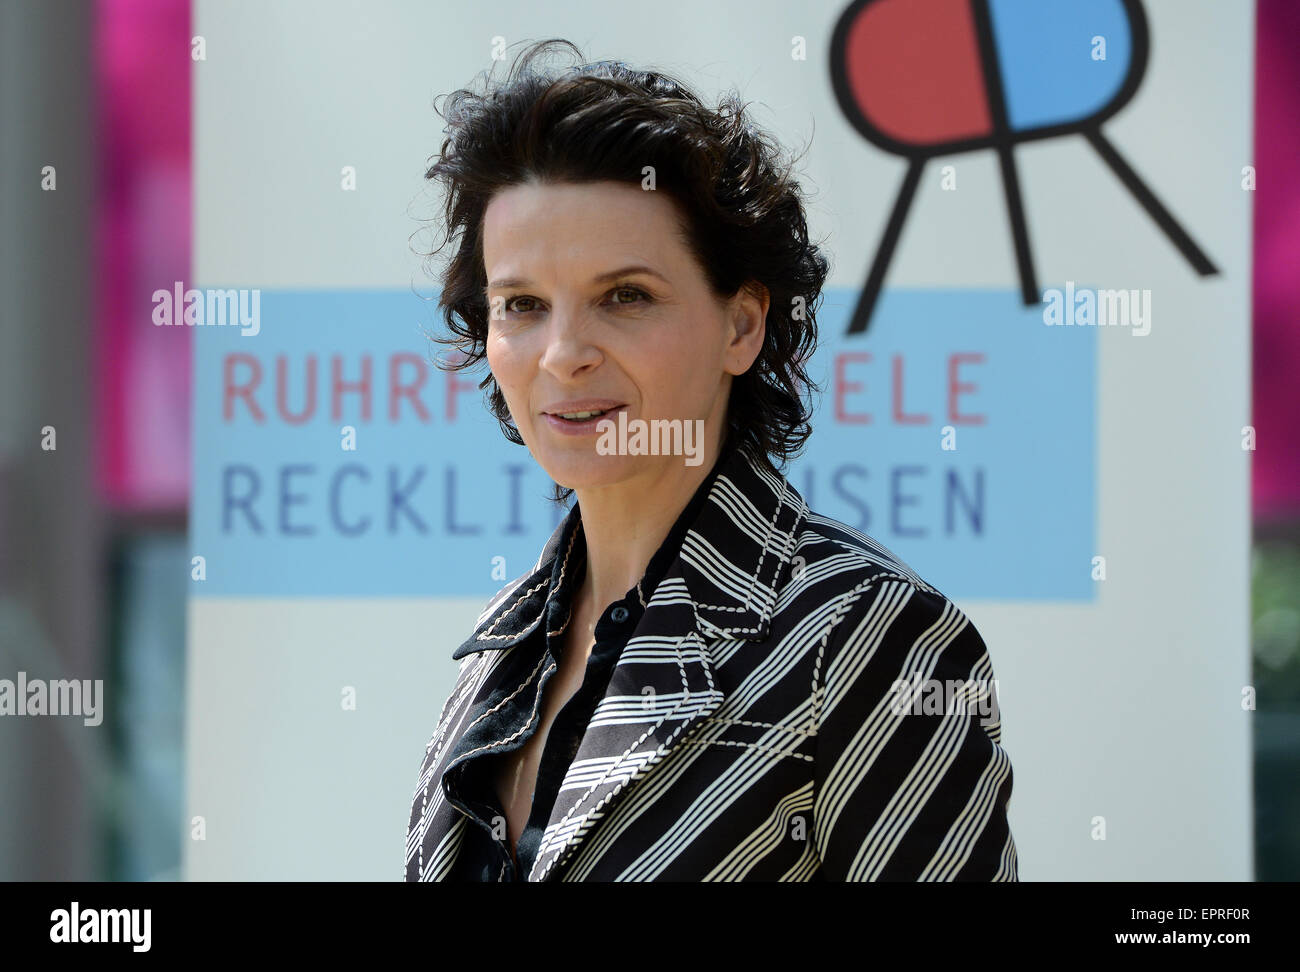 Recklinghausen, Germany. 21st May, 2015. French actress Juliette Binoche during a press conference on the Ruhr Festival in Recklinghausen, Germany, 21 May 2015. Binoche can be seen in the production of 'Antigone.' Photo: CAROLINE SEIDEL/dpa/Alamy Live News Stock Photo